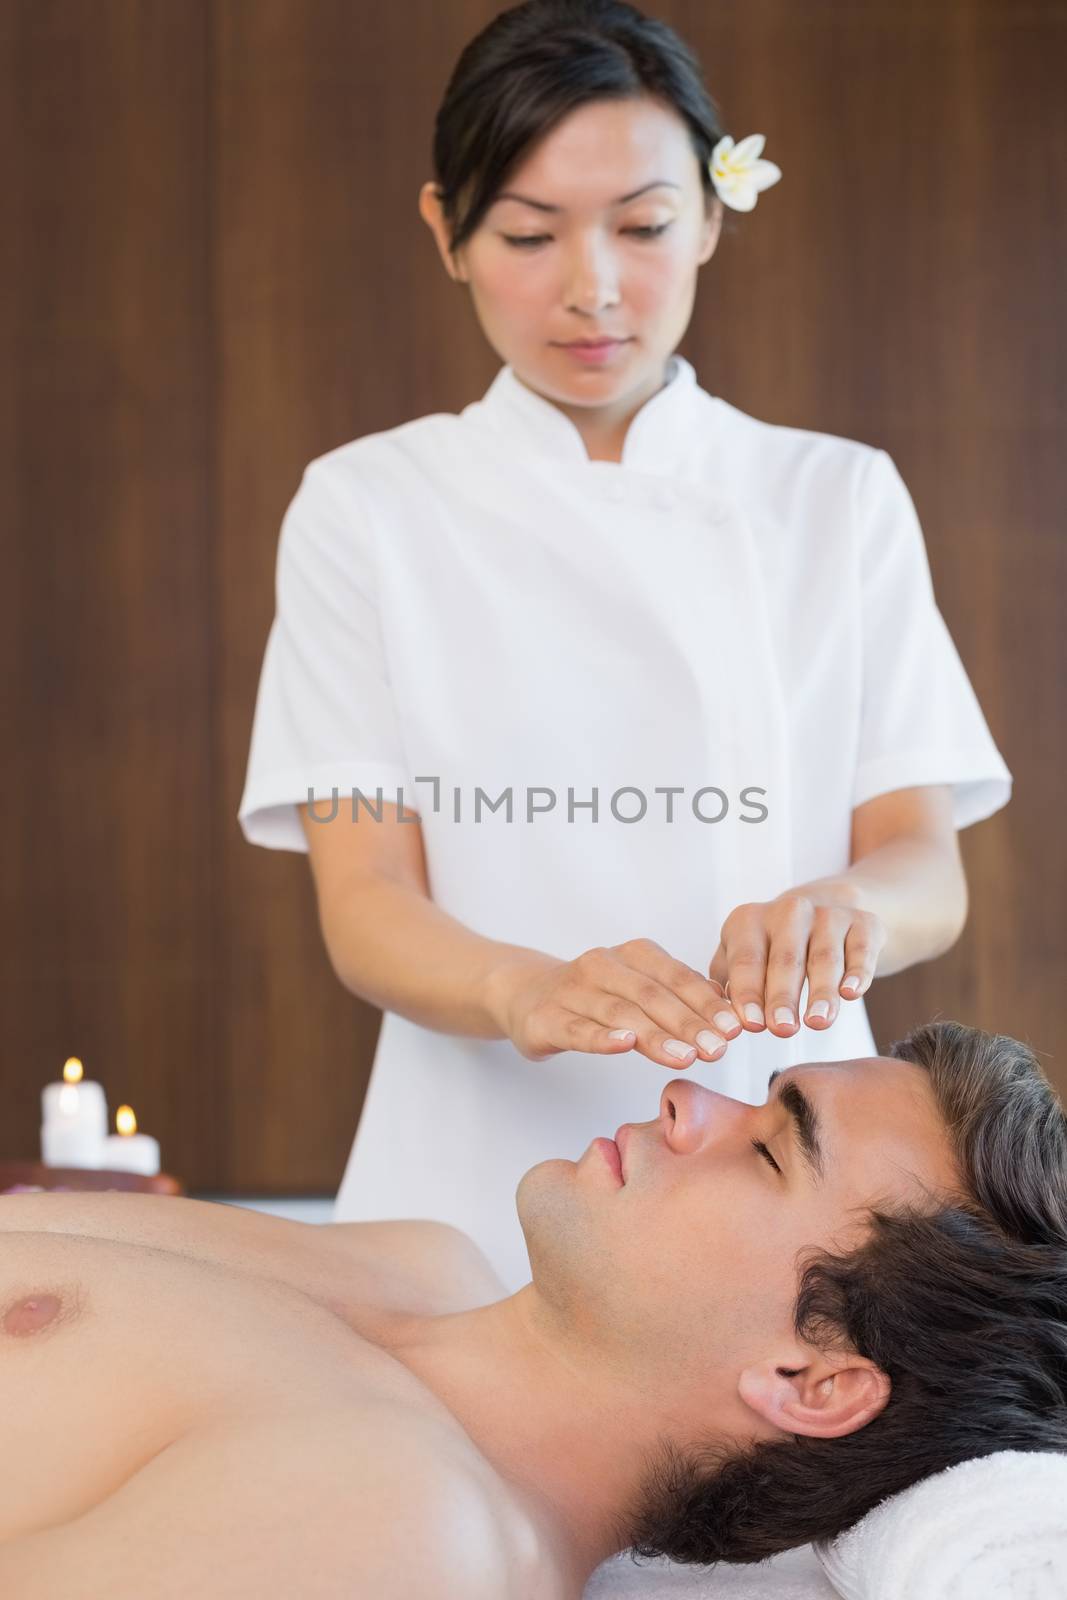 Man receiving treatment at spa center by Wavebreakmedia